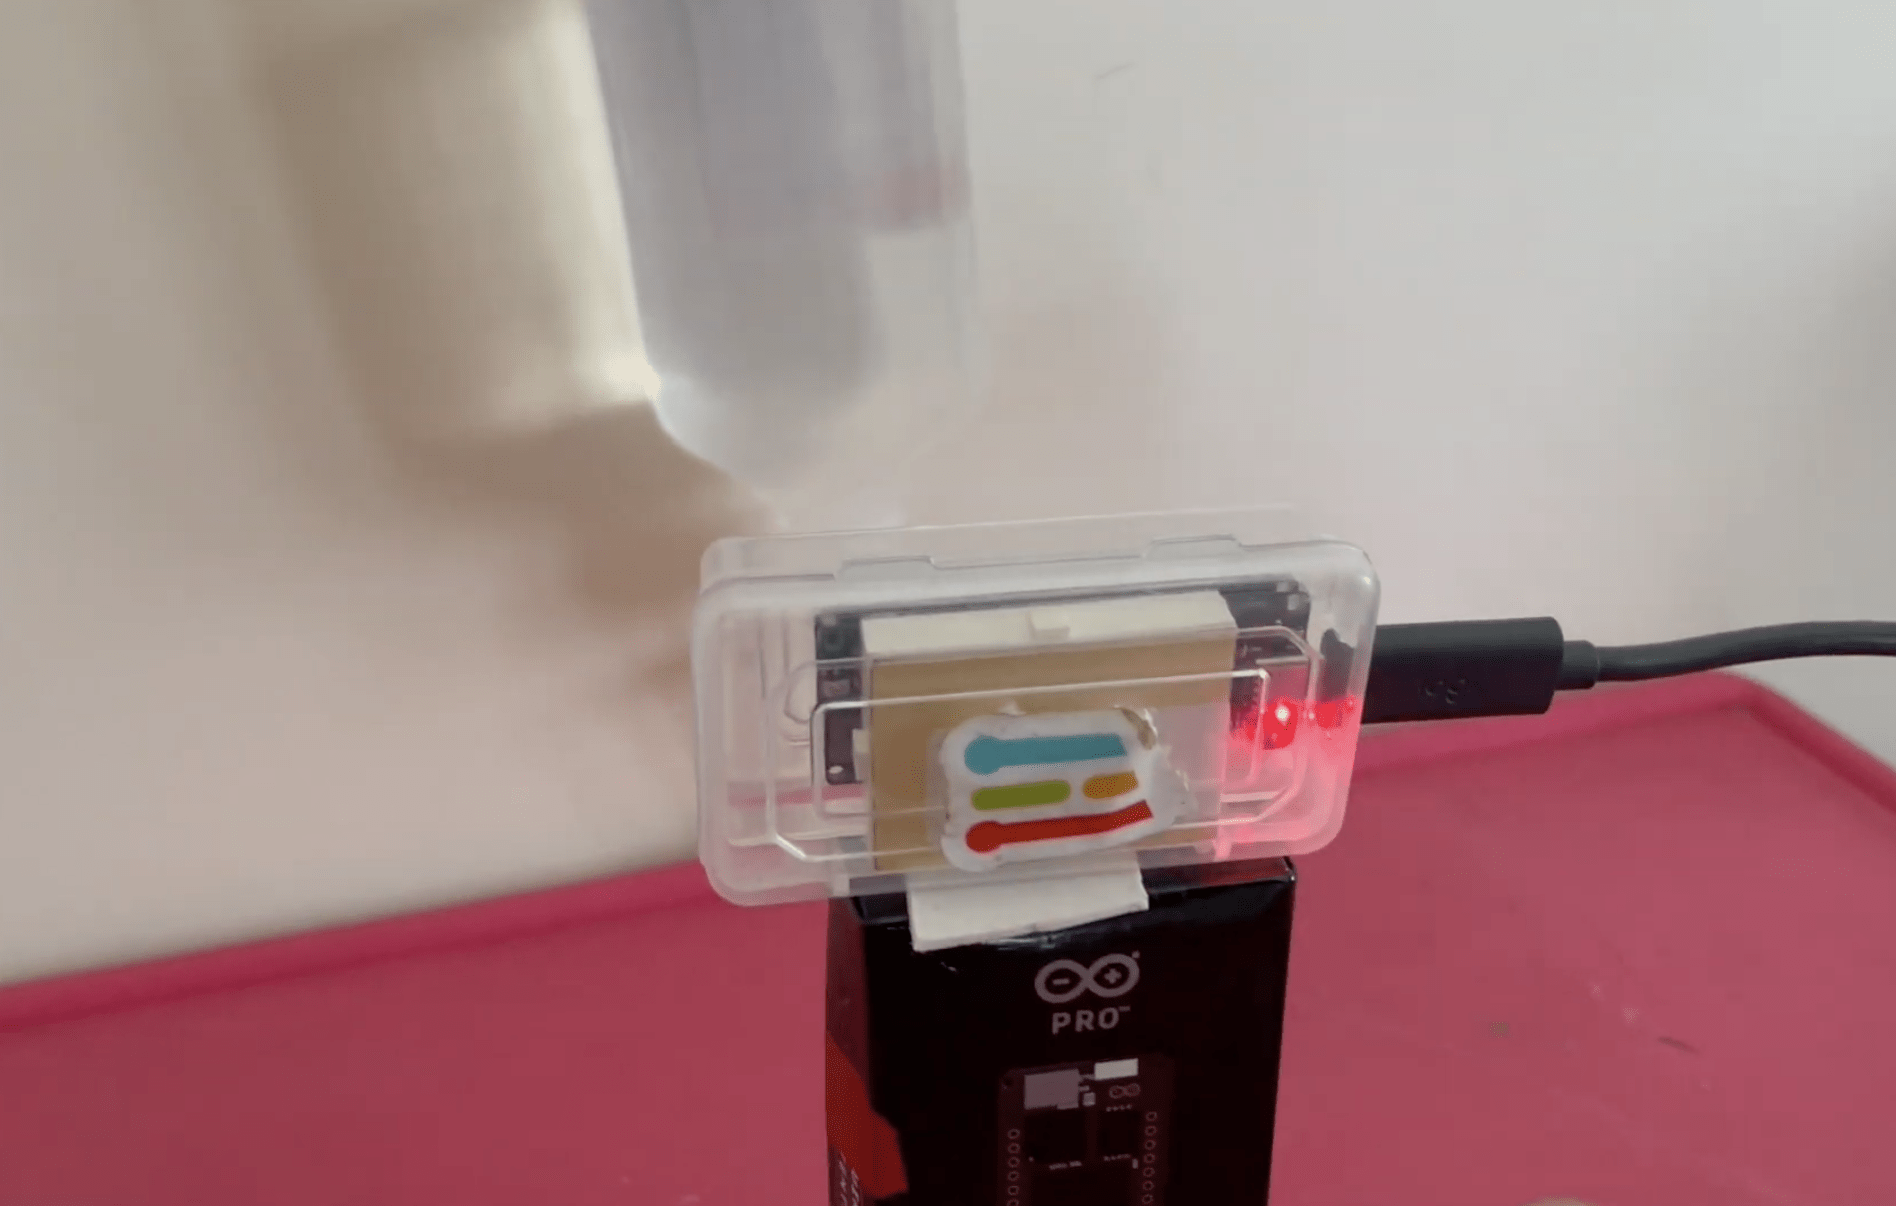 Monitoring IV Fluid Bag Levels with the Arduino Portenta H7 and Vision Shield